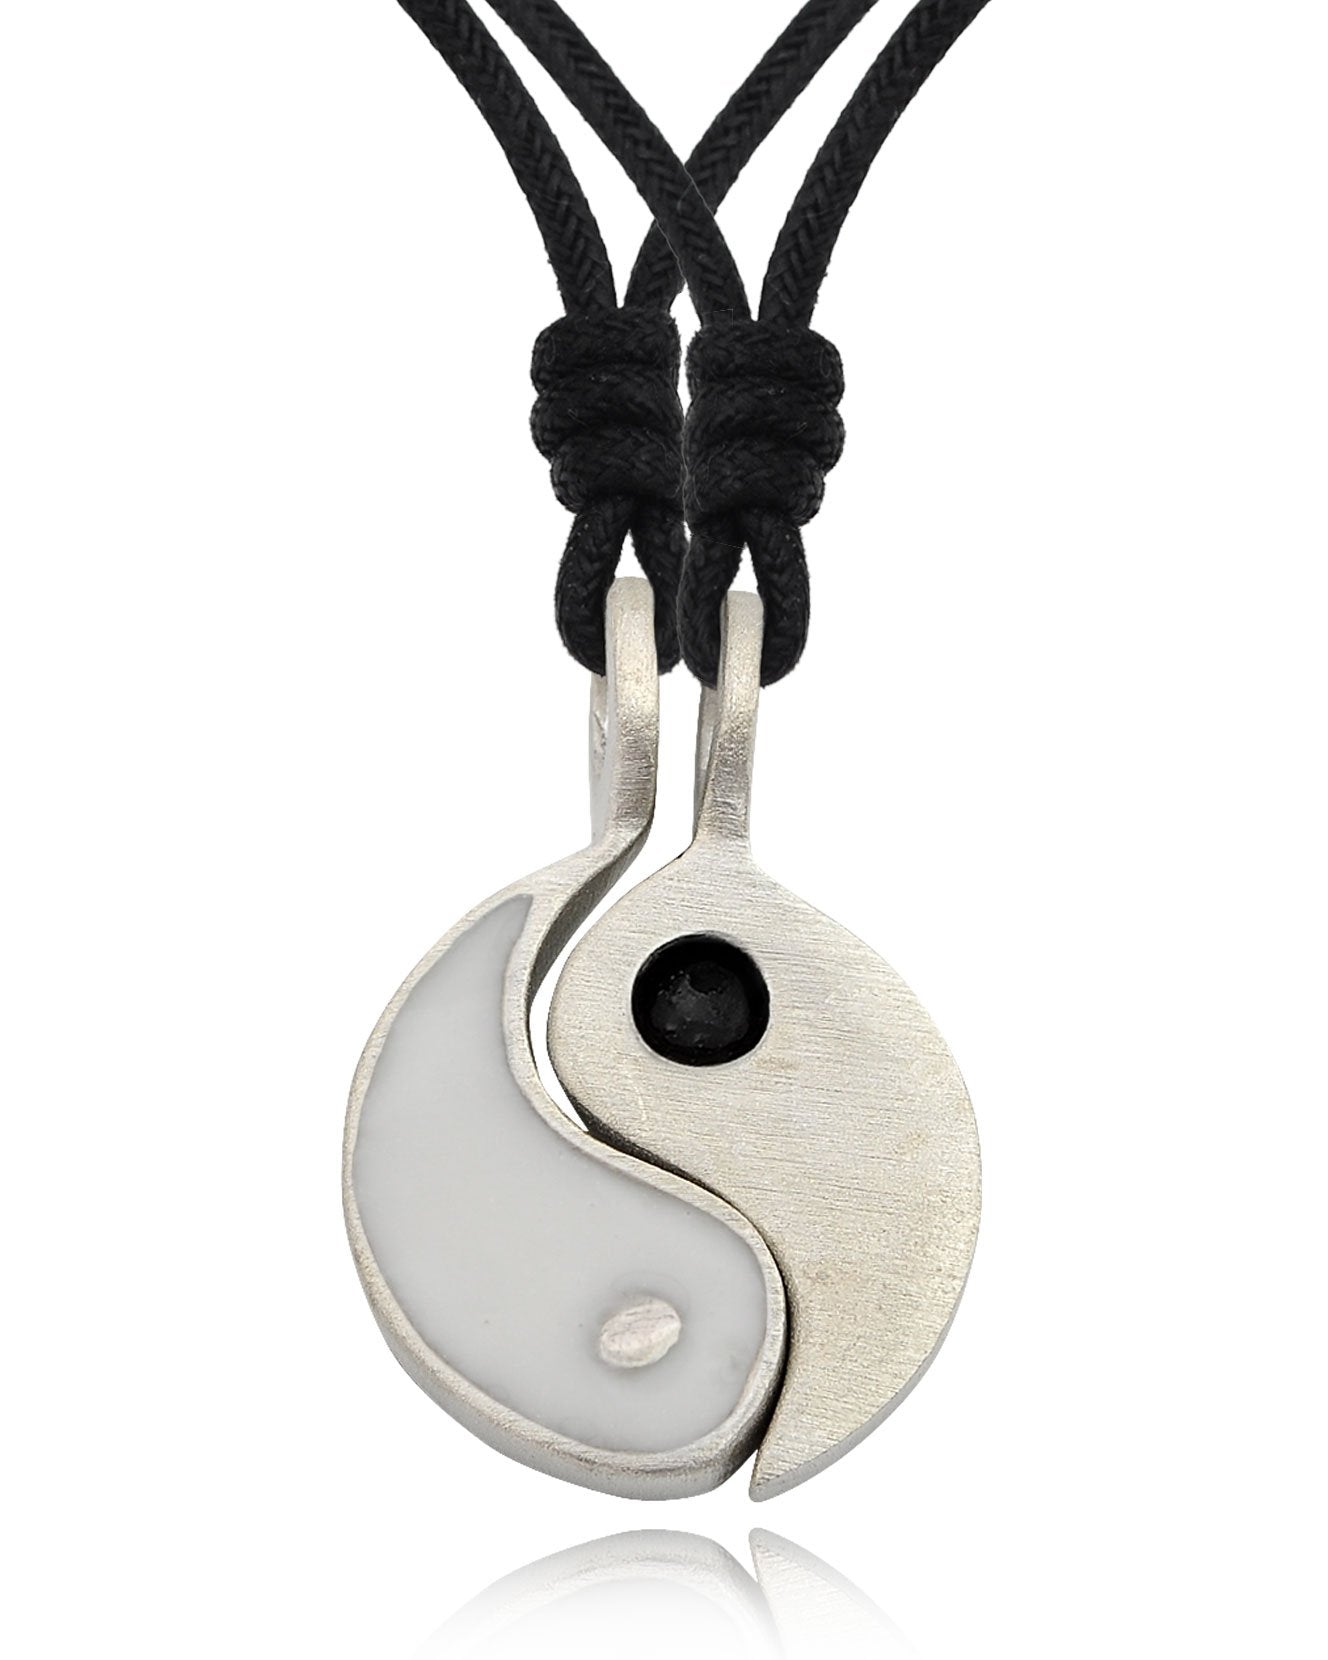 Colorful Ying Yang (2 Necklaces) Silver Pewter Necklace Pendant Jewelry